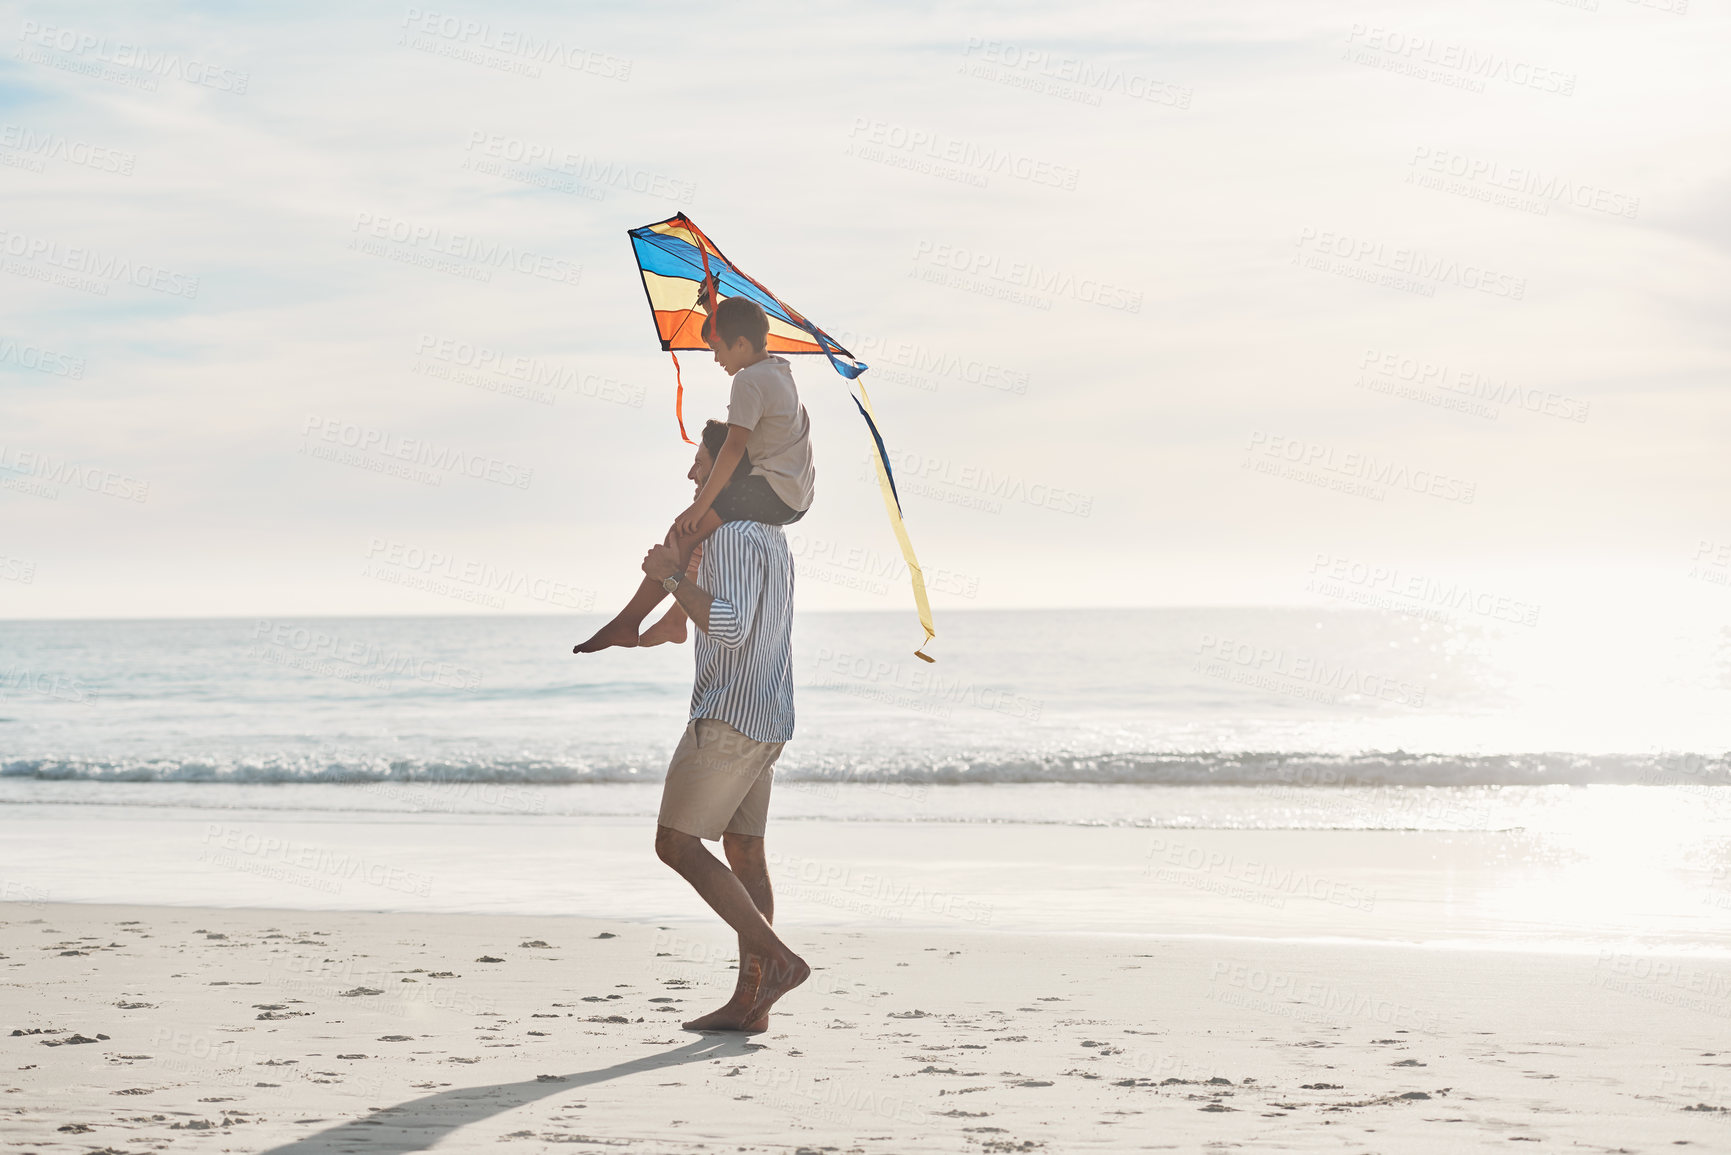 Buy stock photo Full length shot of a young boy being carried on his father's shoulders and holding a kite on the beach